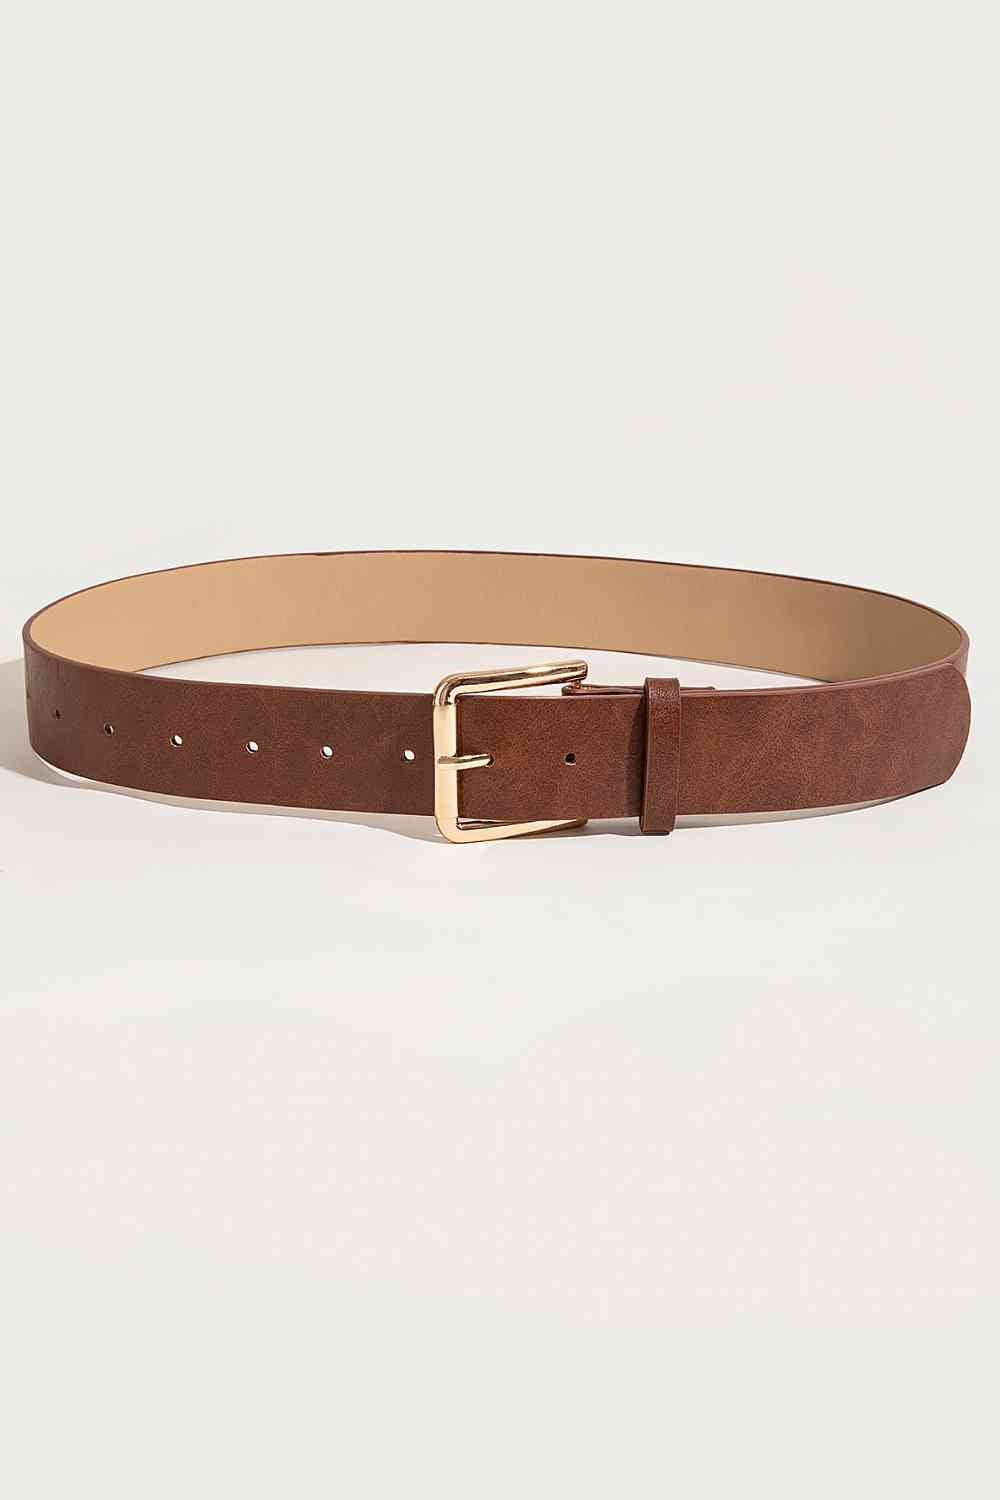 Basic Brown Belt With Gold Buckle